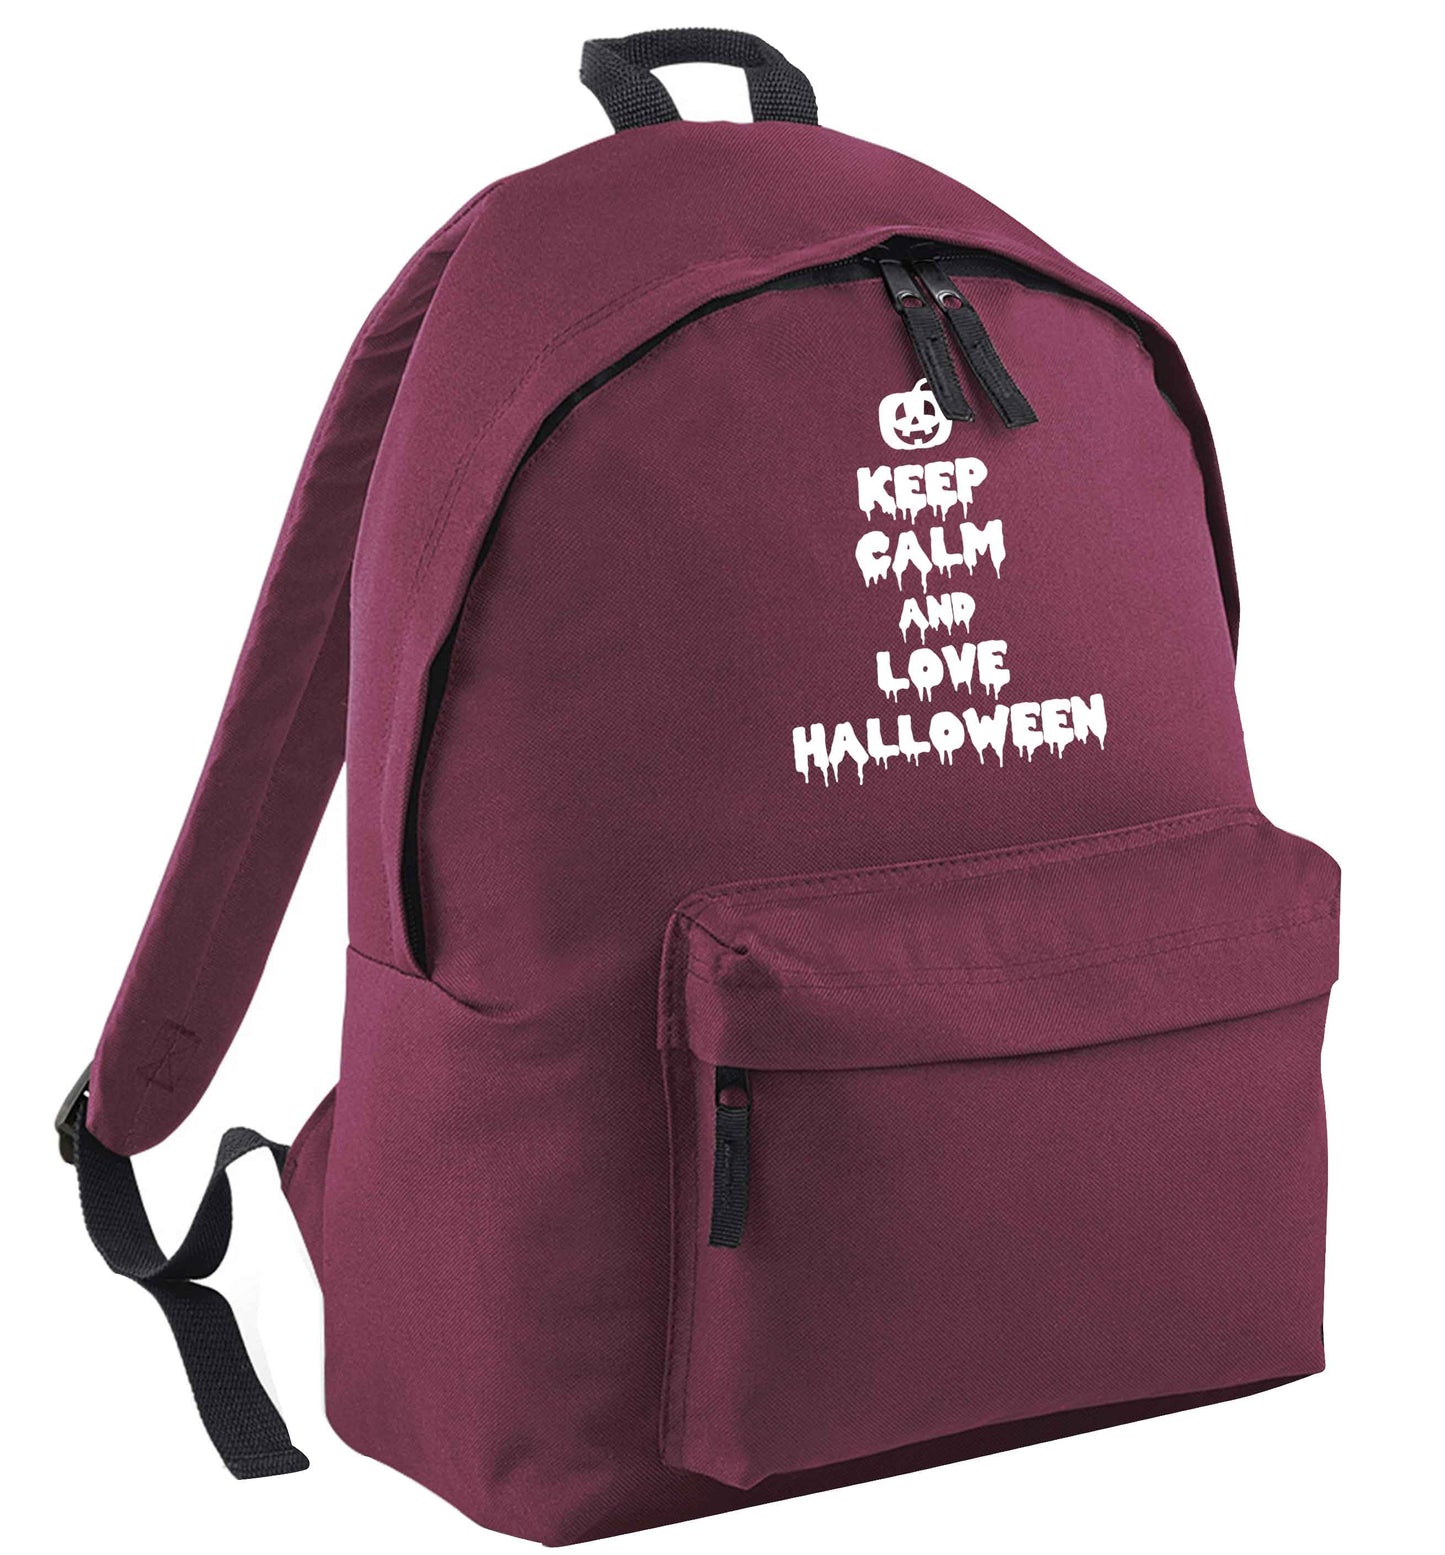 Keep calm and love halloween | Children's backpack